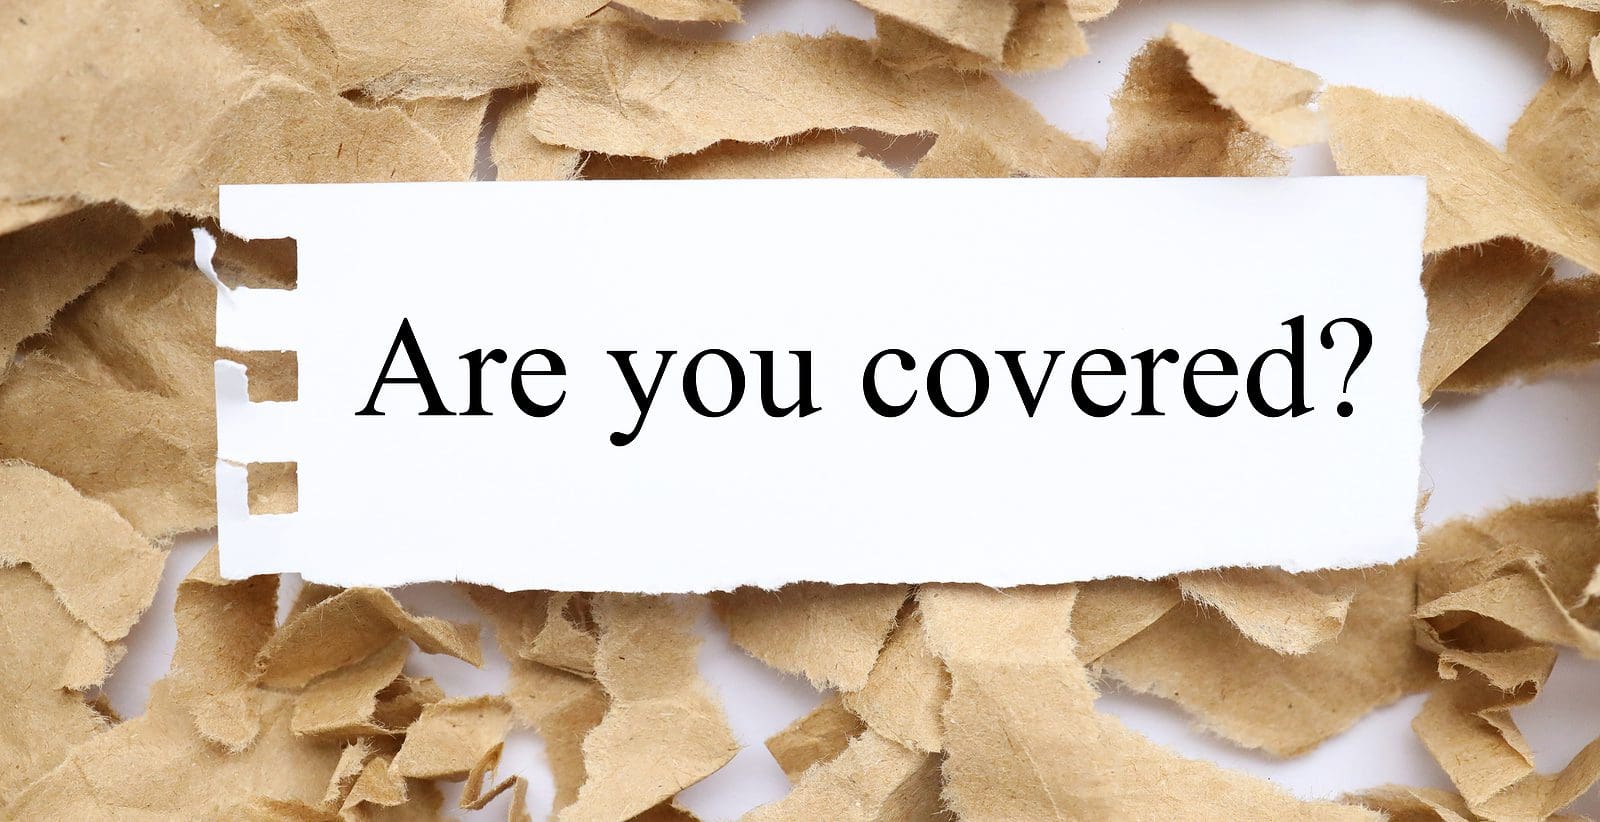 Are You Covered. By asking if you are insured against liability for a car, road, house or other liability. text on white paper on torn paper background